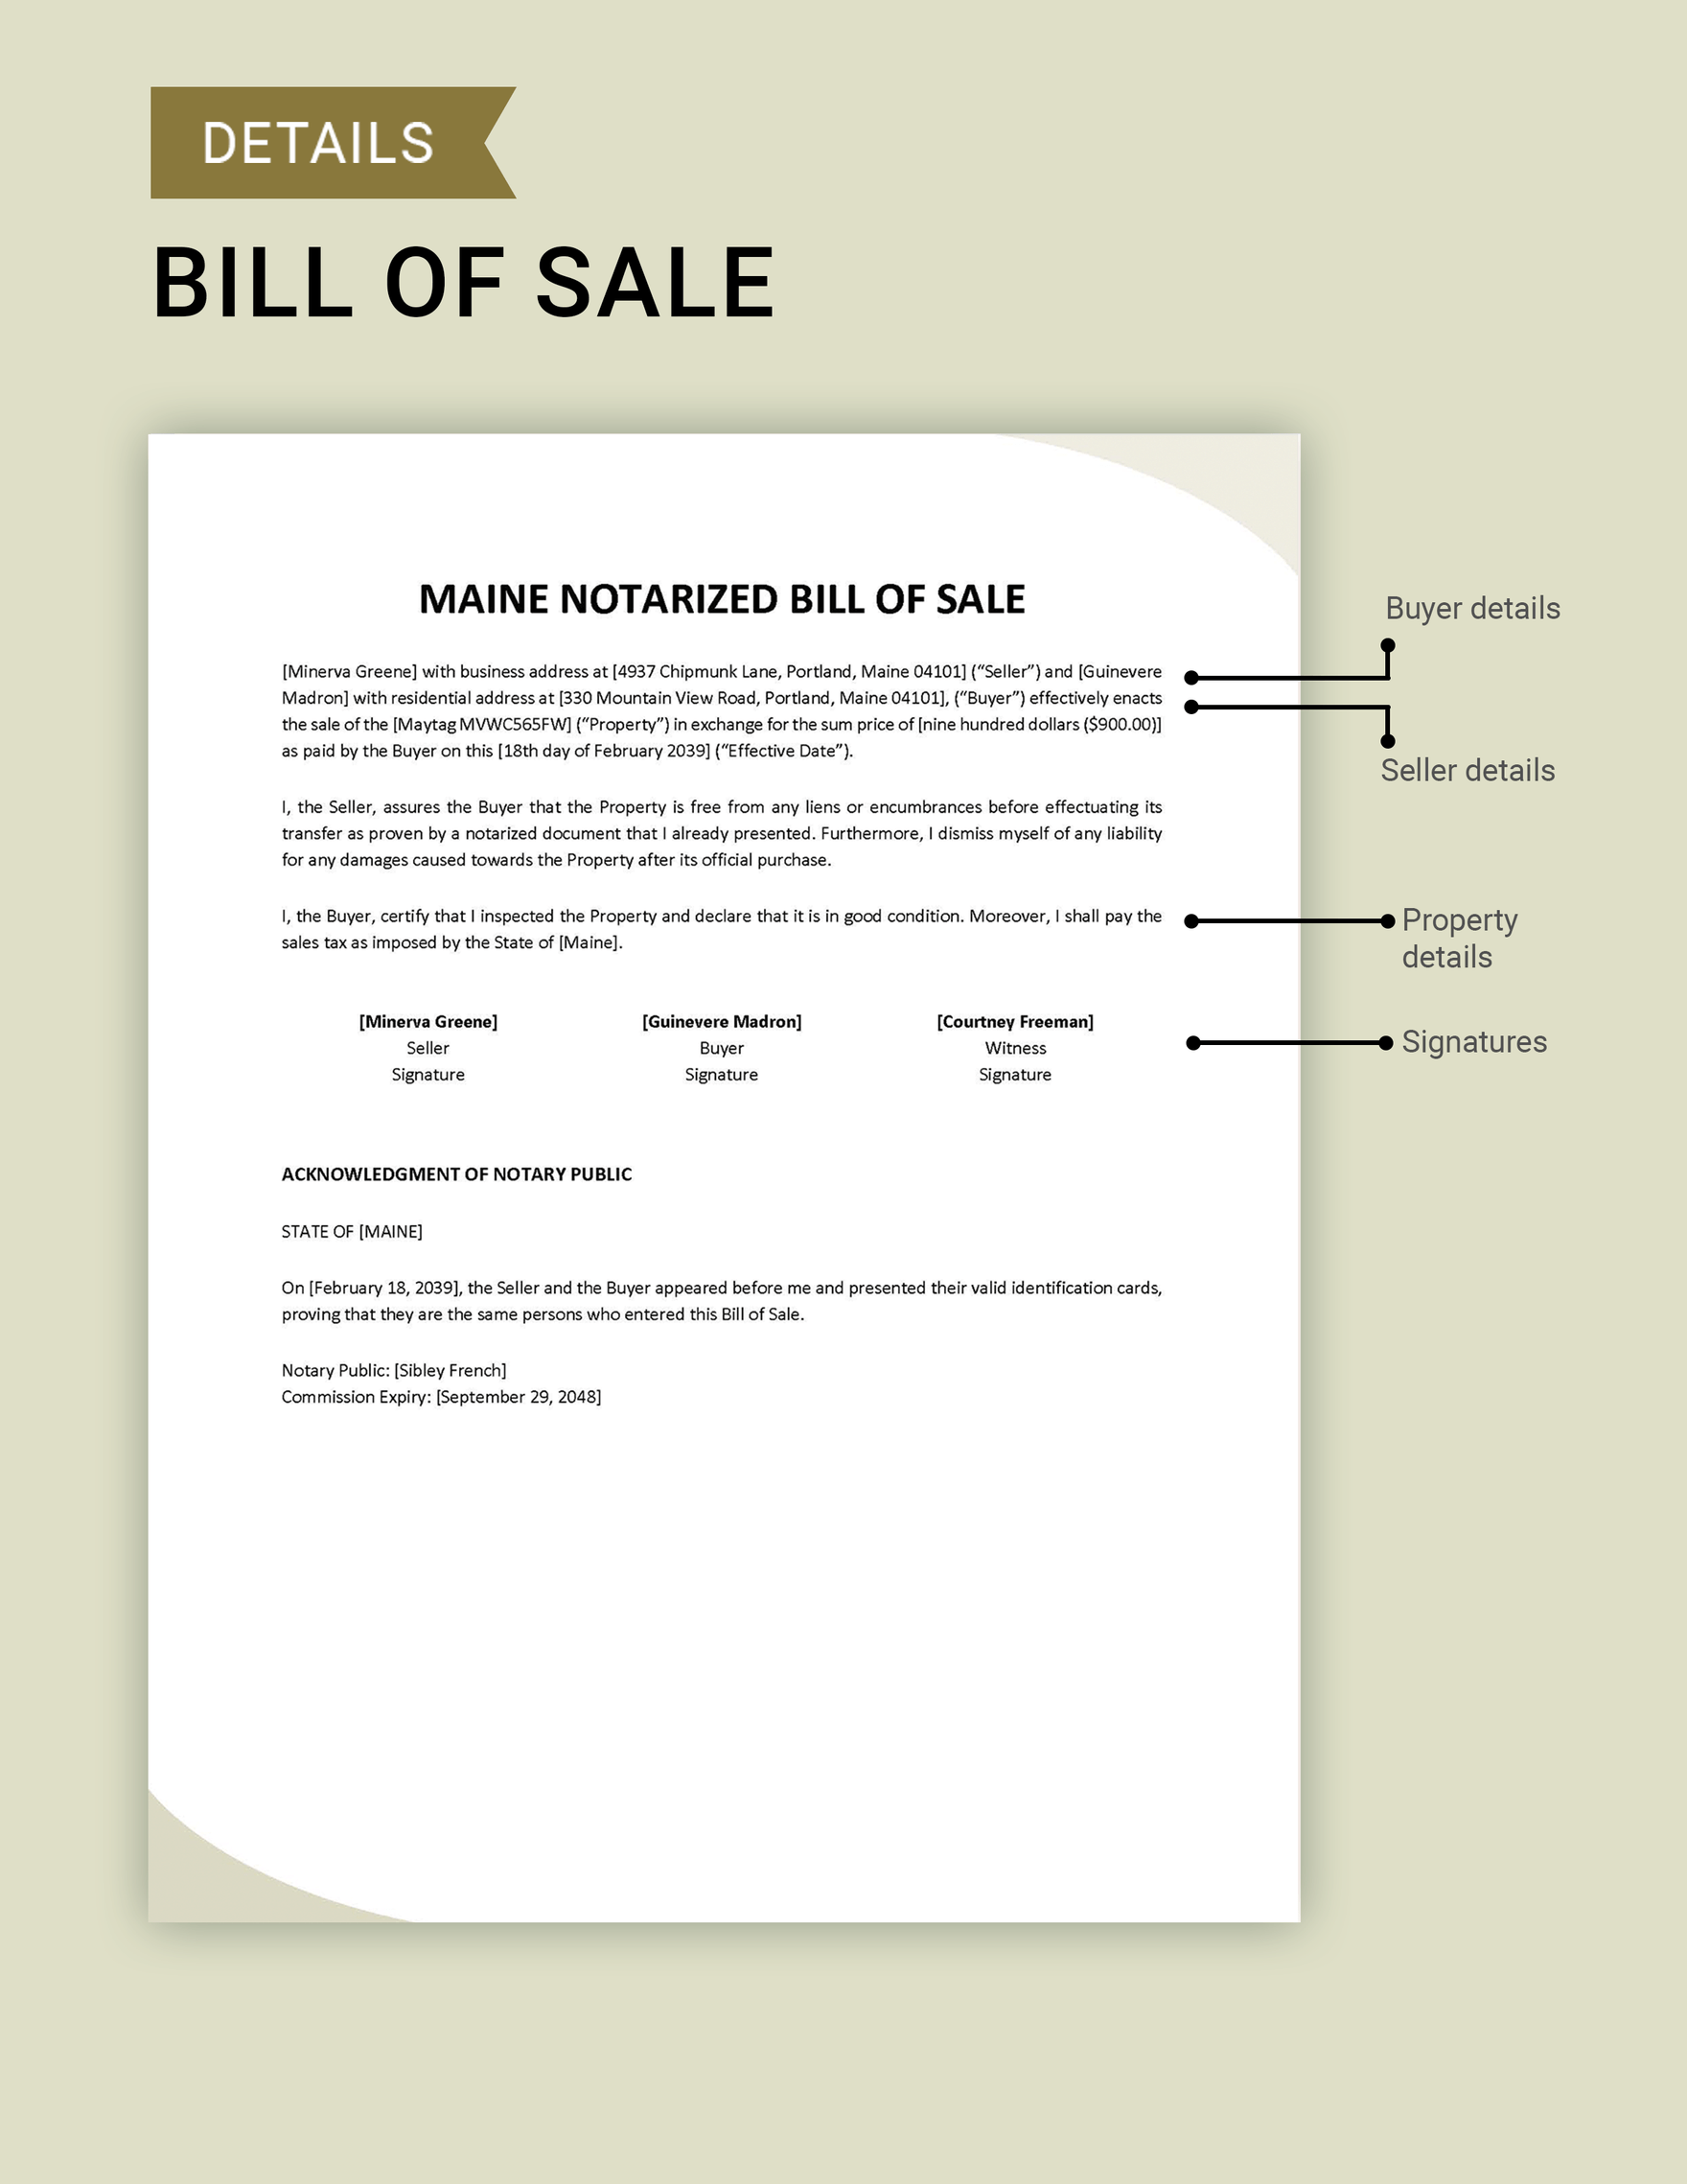 Maine Notarized Bill of Sale Template